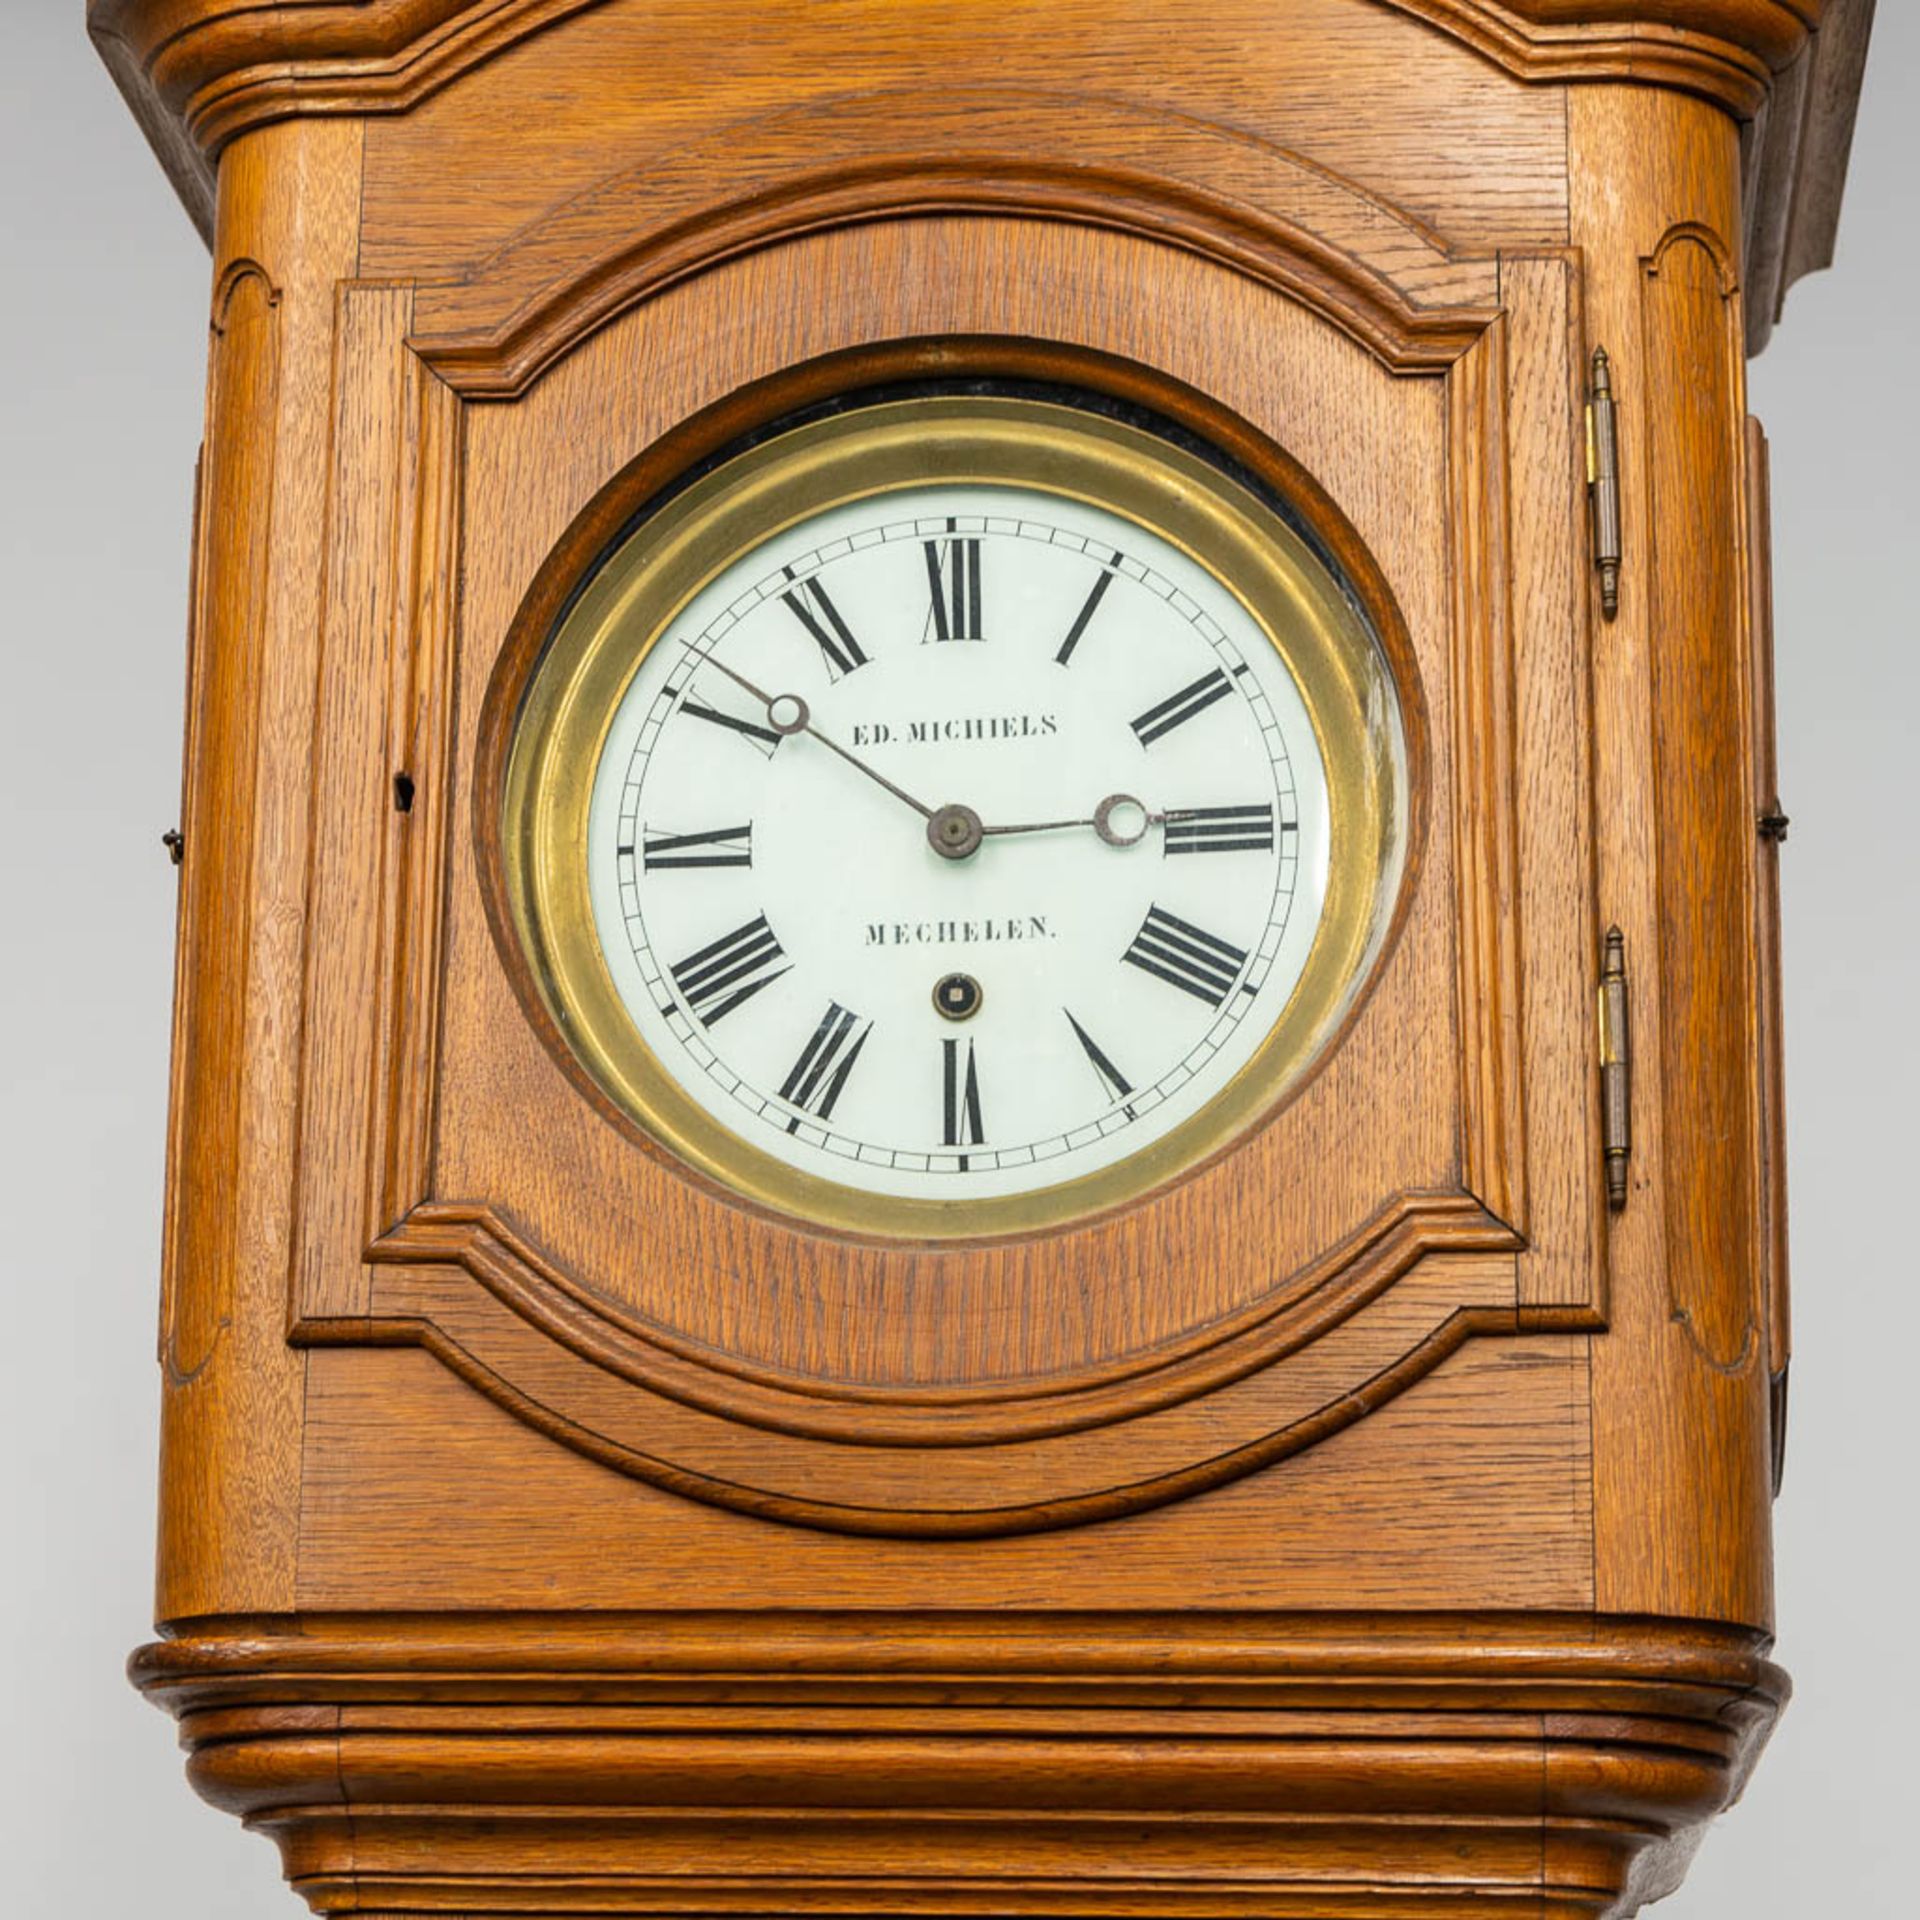 A large standing clock with compensation pendulum, 19th century. Marked Ed. Michiels Mechelen. (53 x - Image 7 of 7